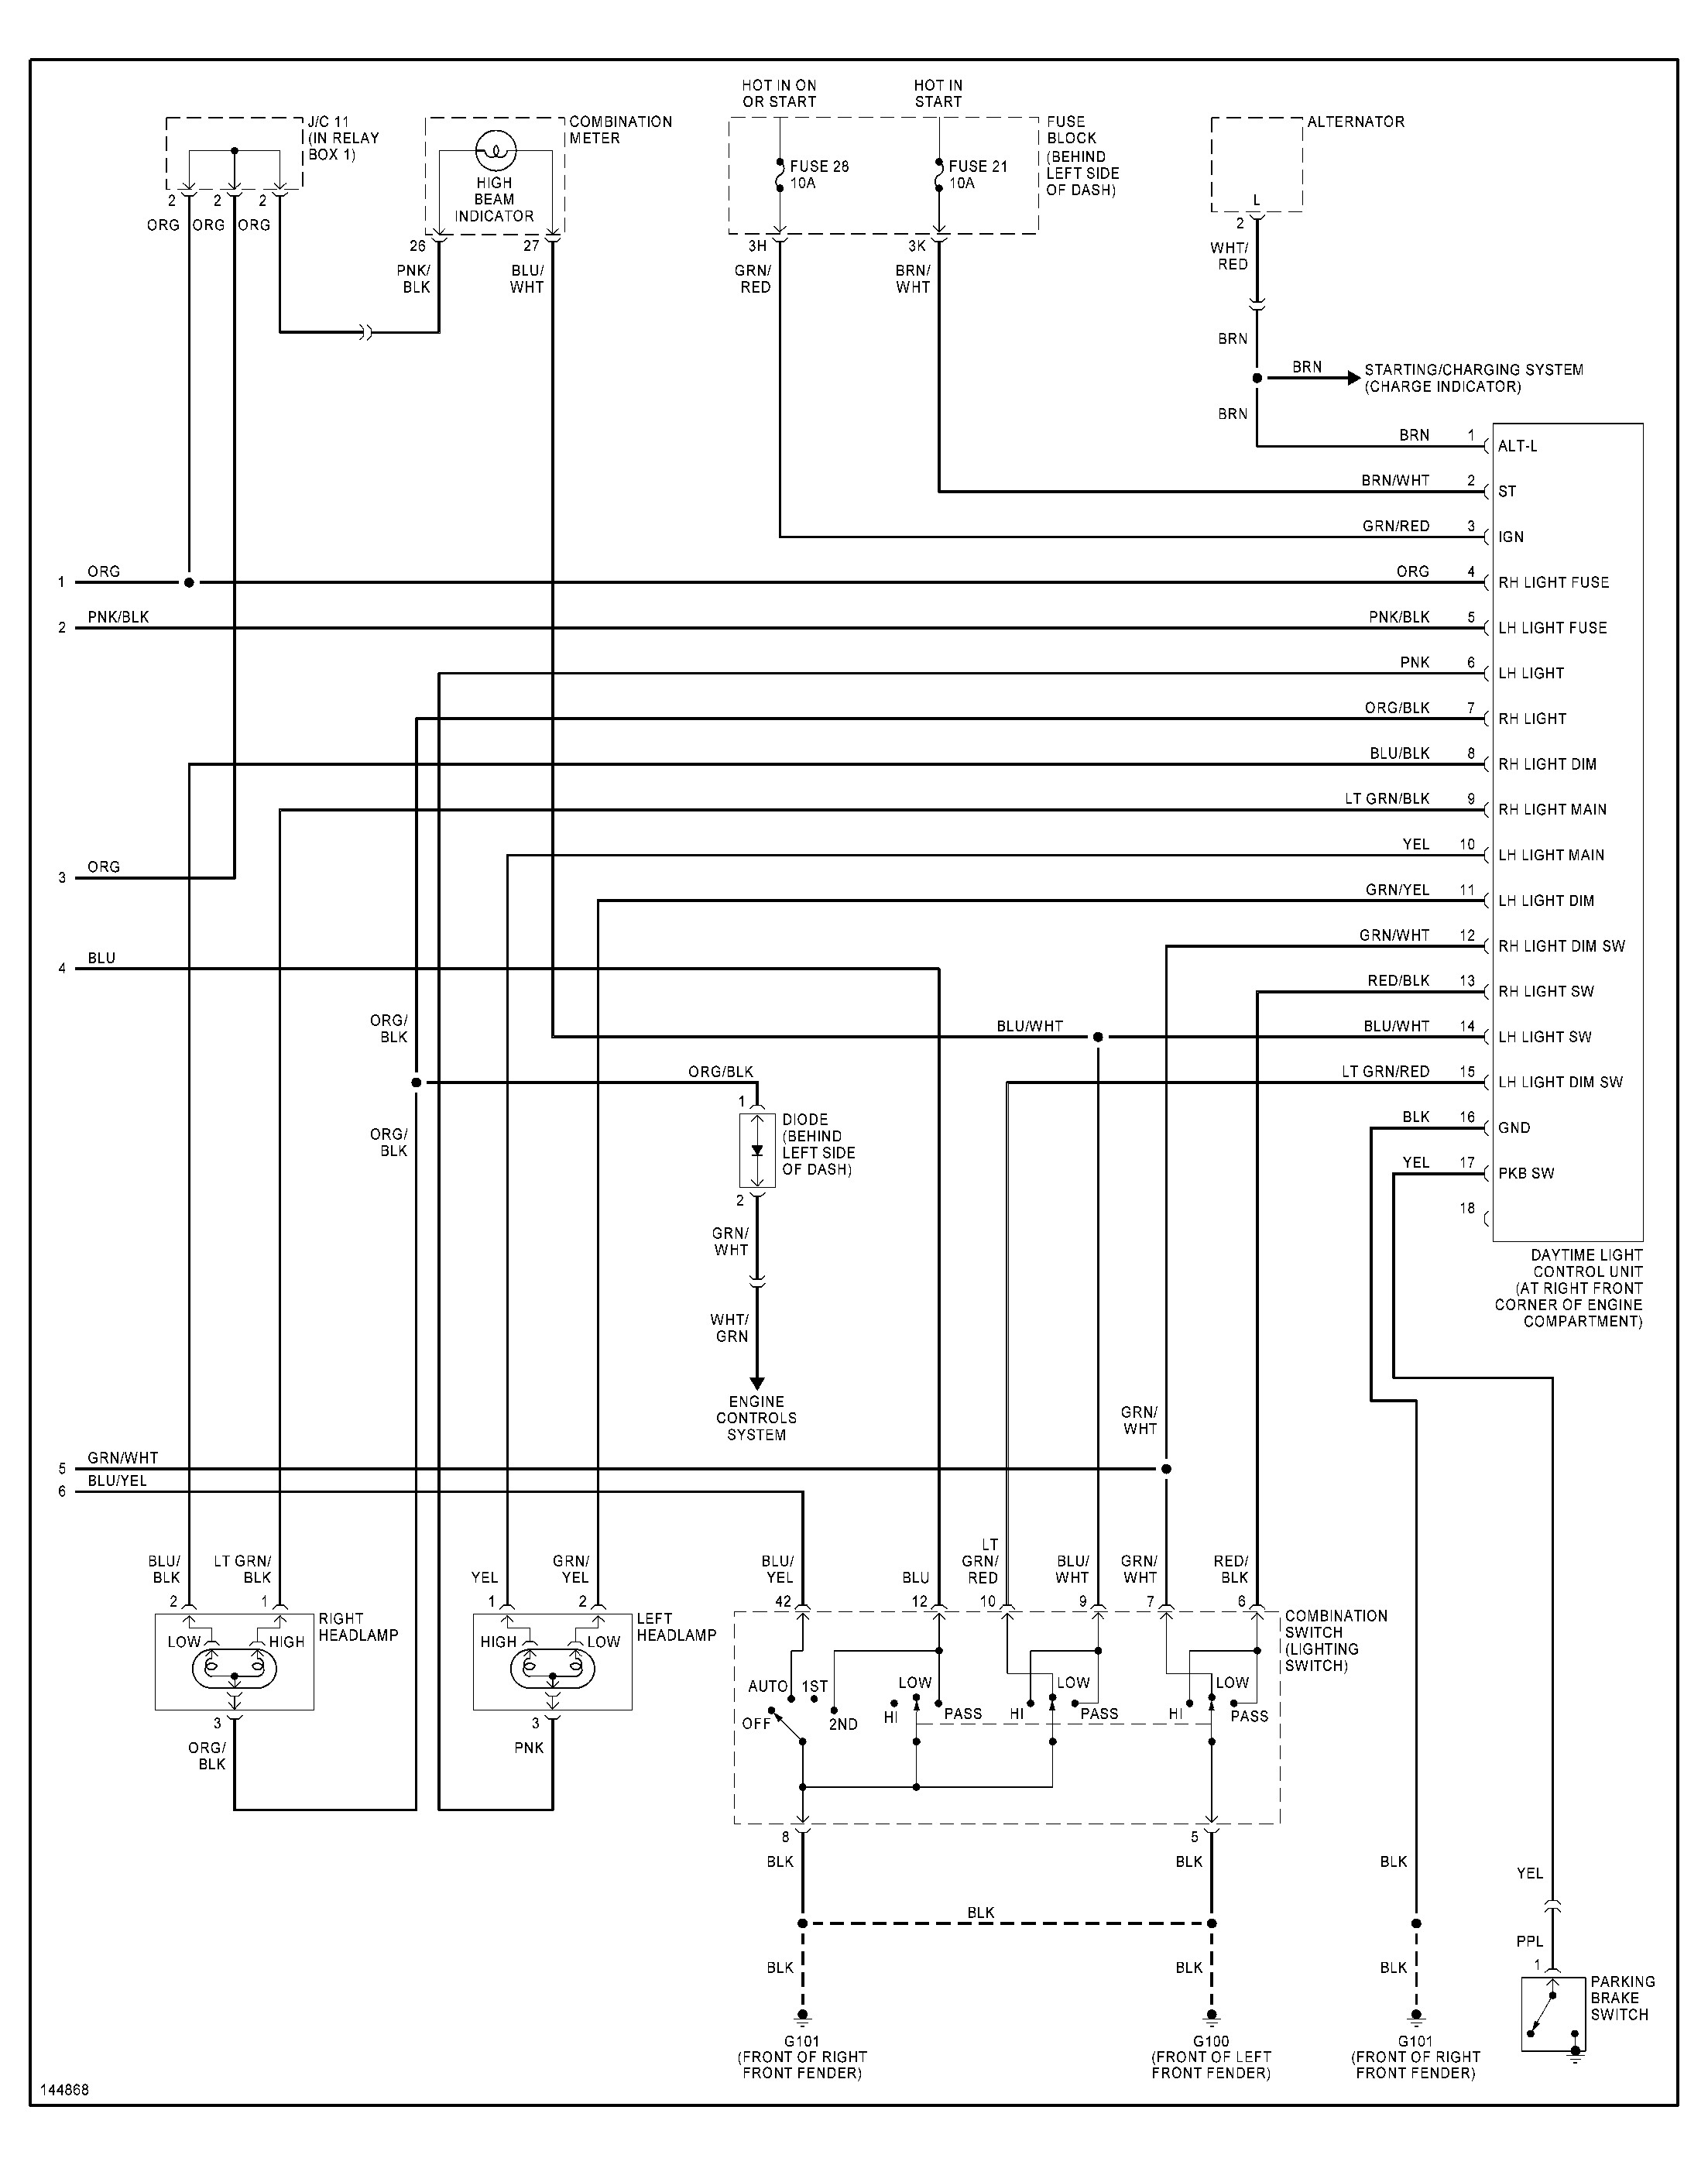 1995 Nissan Maxima Engine Diagram Nissan Maxima Radio Diagram Another Blog About Wiring Diagram • Of 1995 Nissan Maxima Engine Diagram